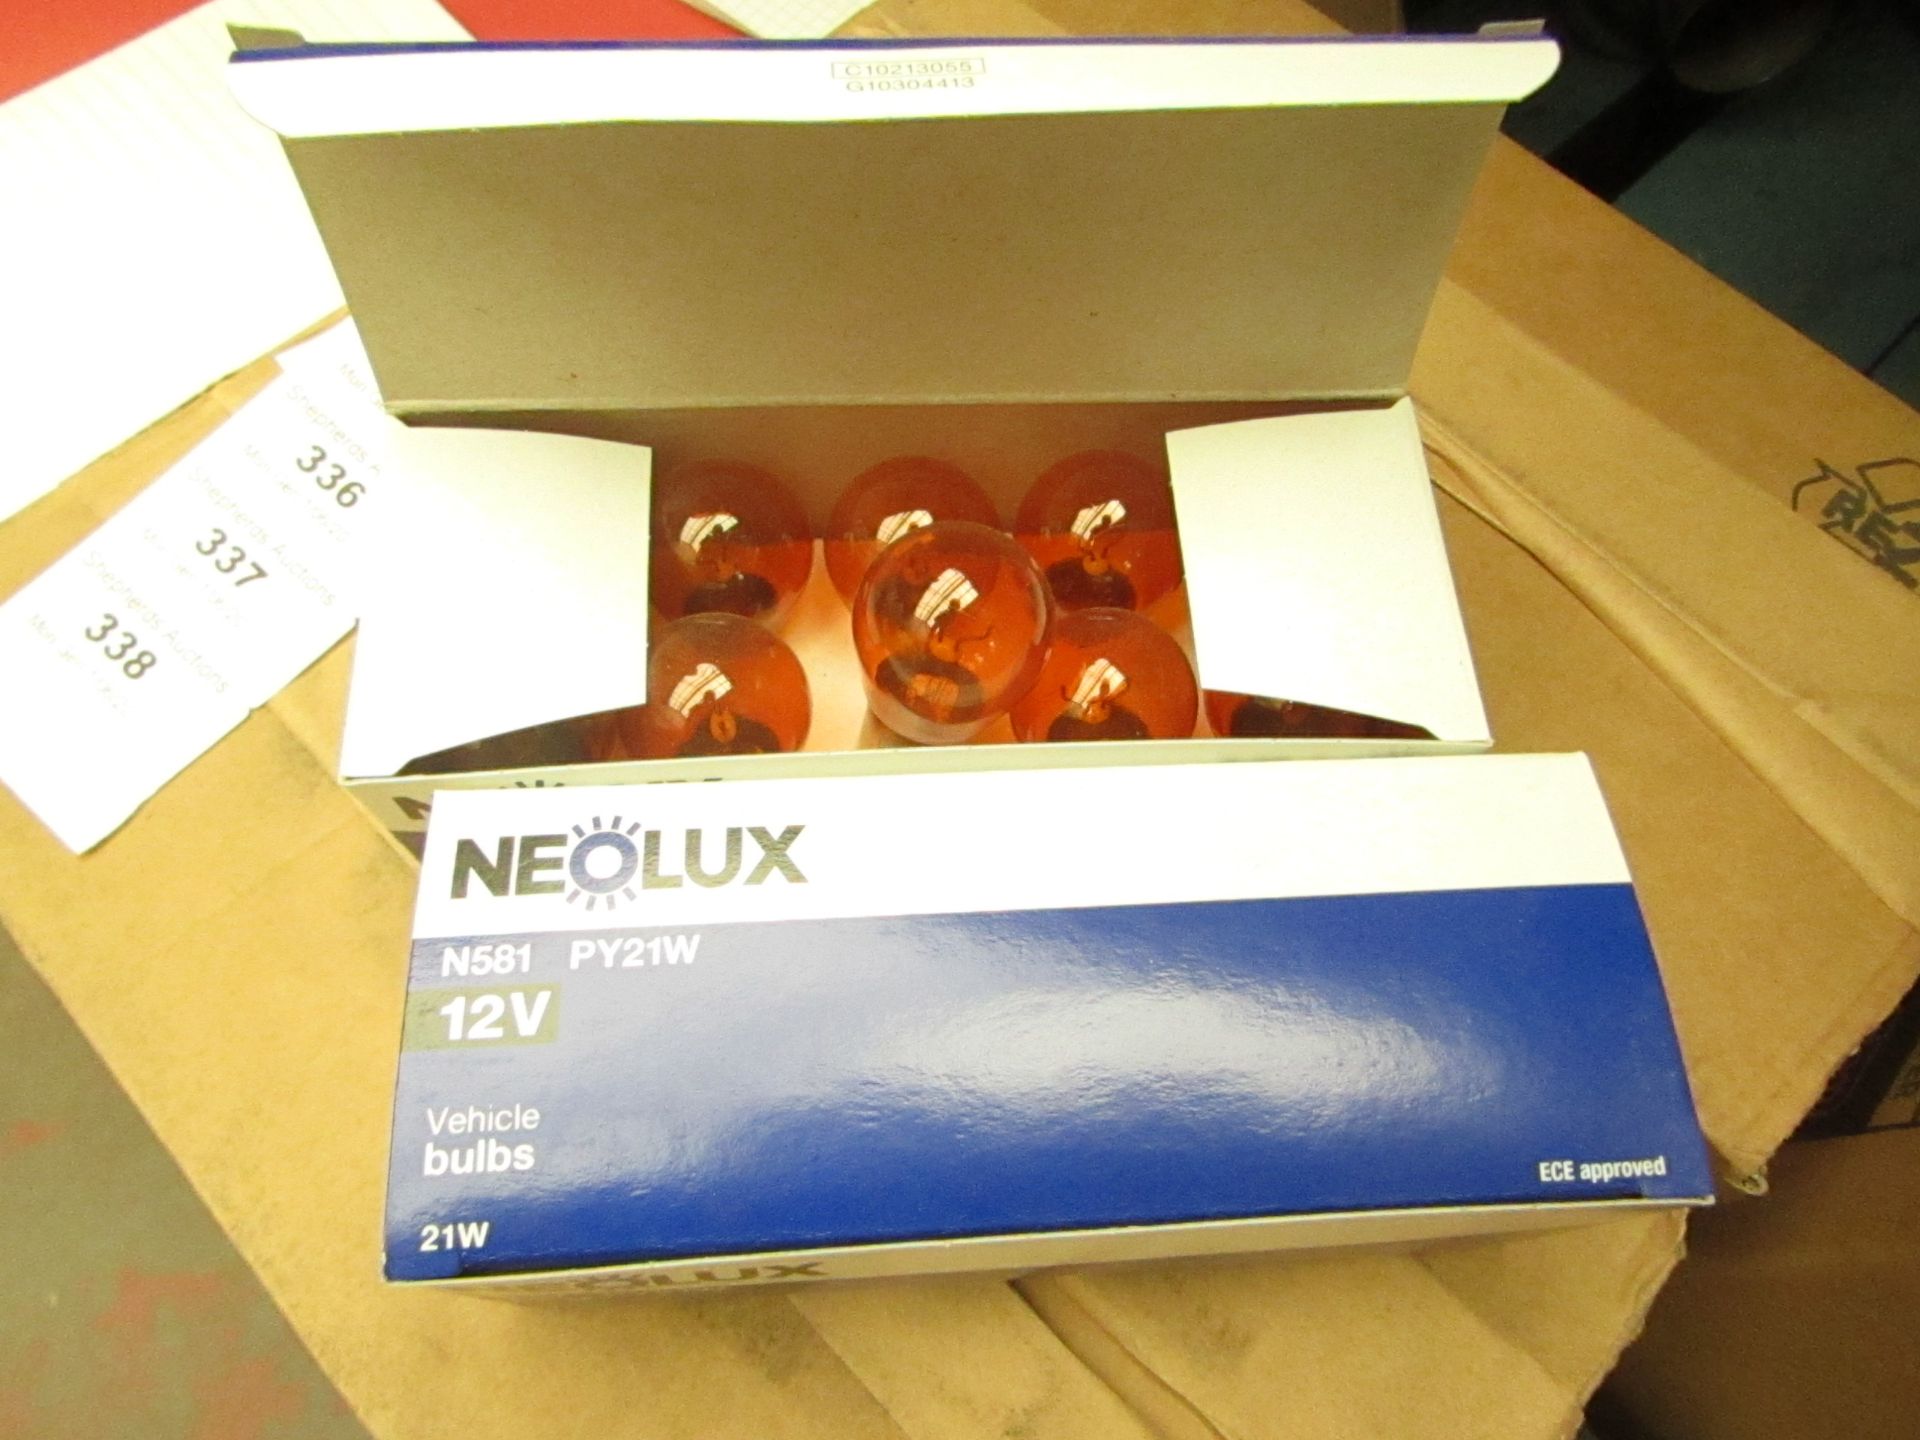 Box of 10x Neolux 12v bulbs, new and boxed.